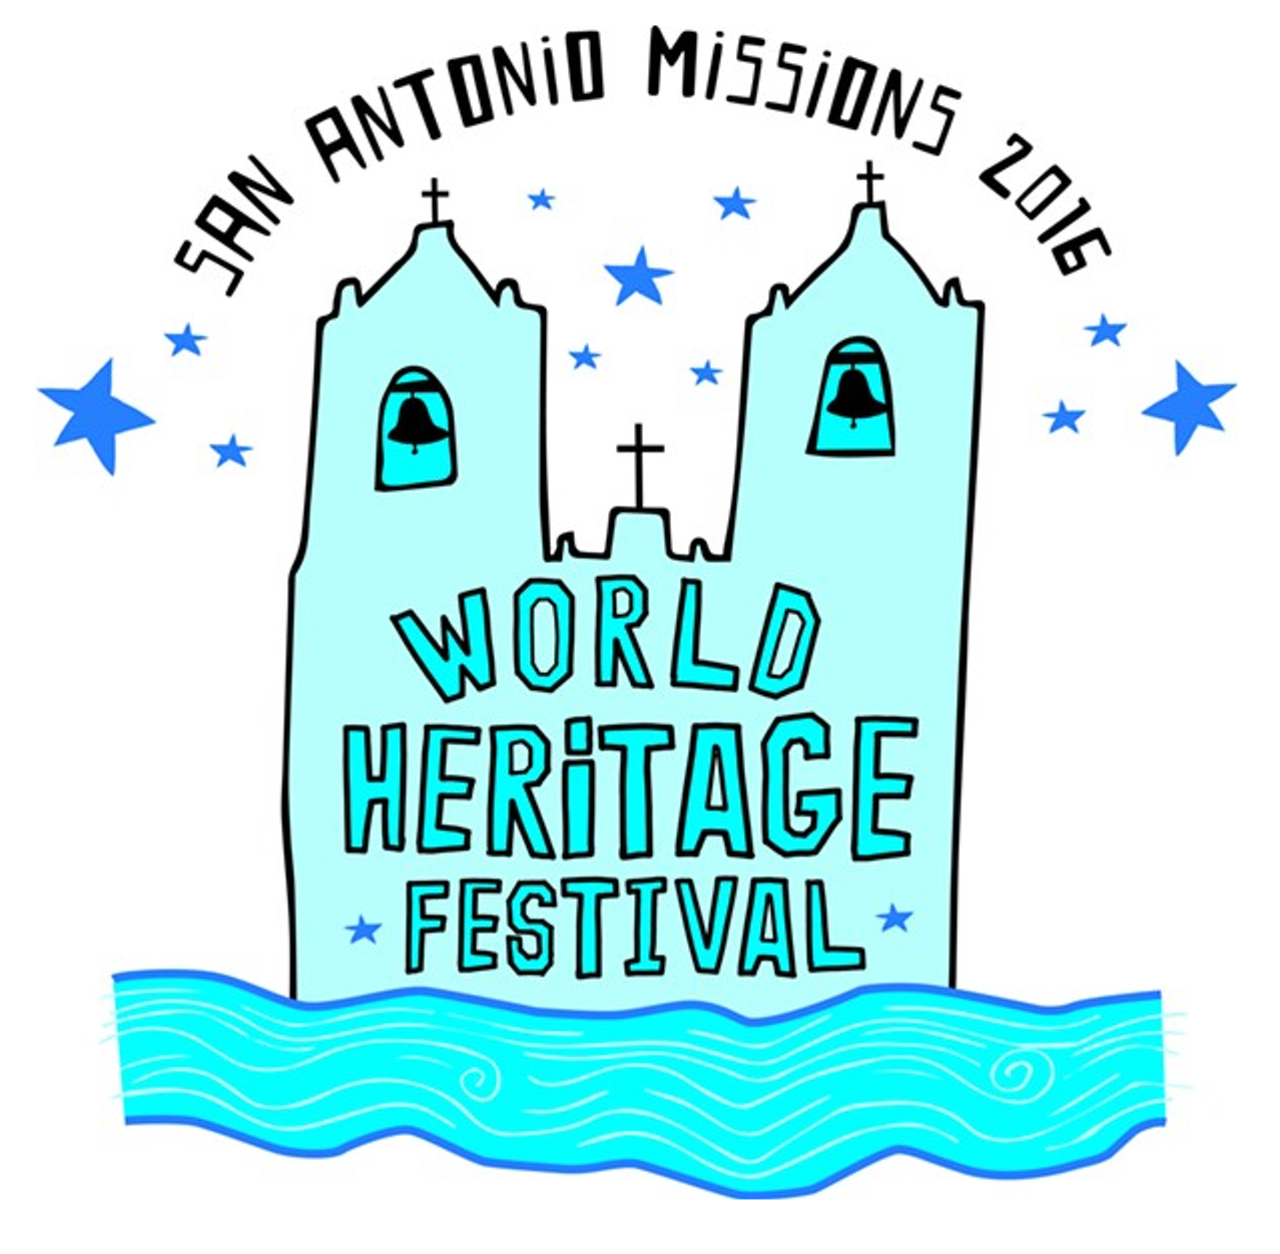 World Heritage Festival
free, Wed Sept. 7-Sun. Sept. - 11.
The City of San Antonio celebrates the first anniversary of the Missions&#146; designation as a UNESCO World Heritage Site with a multifaceted festival. Visit  worldheritagefestival.org   for a full list of events